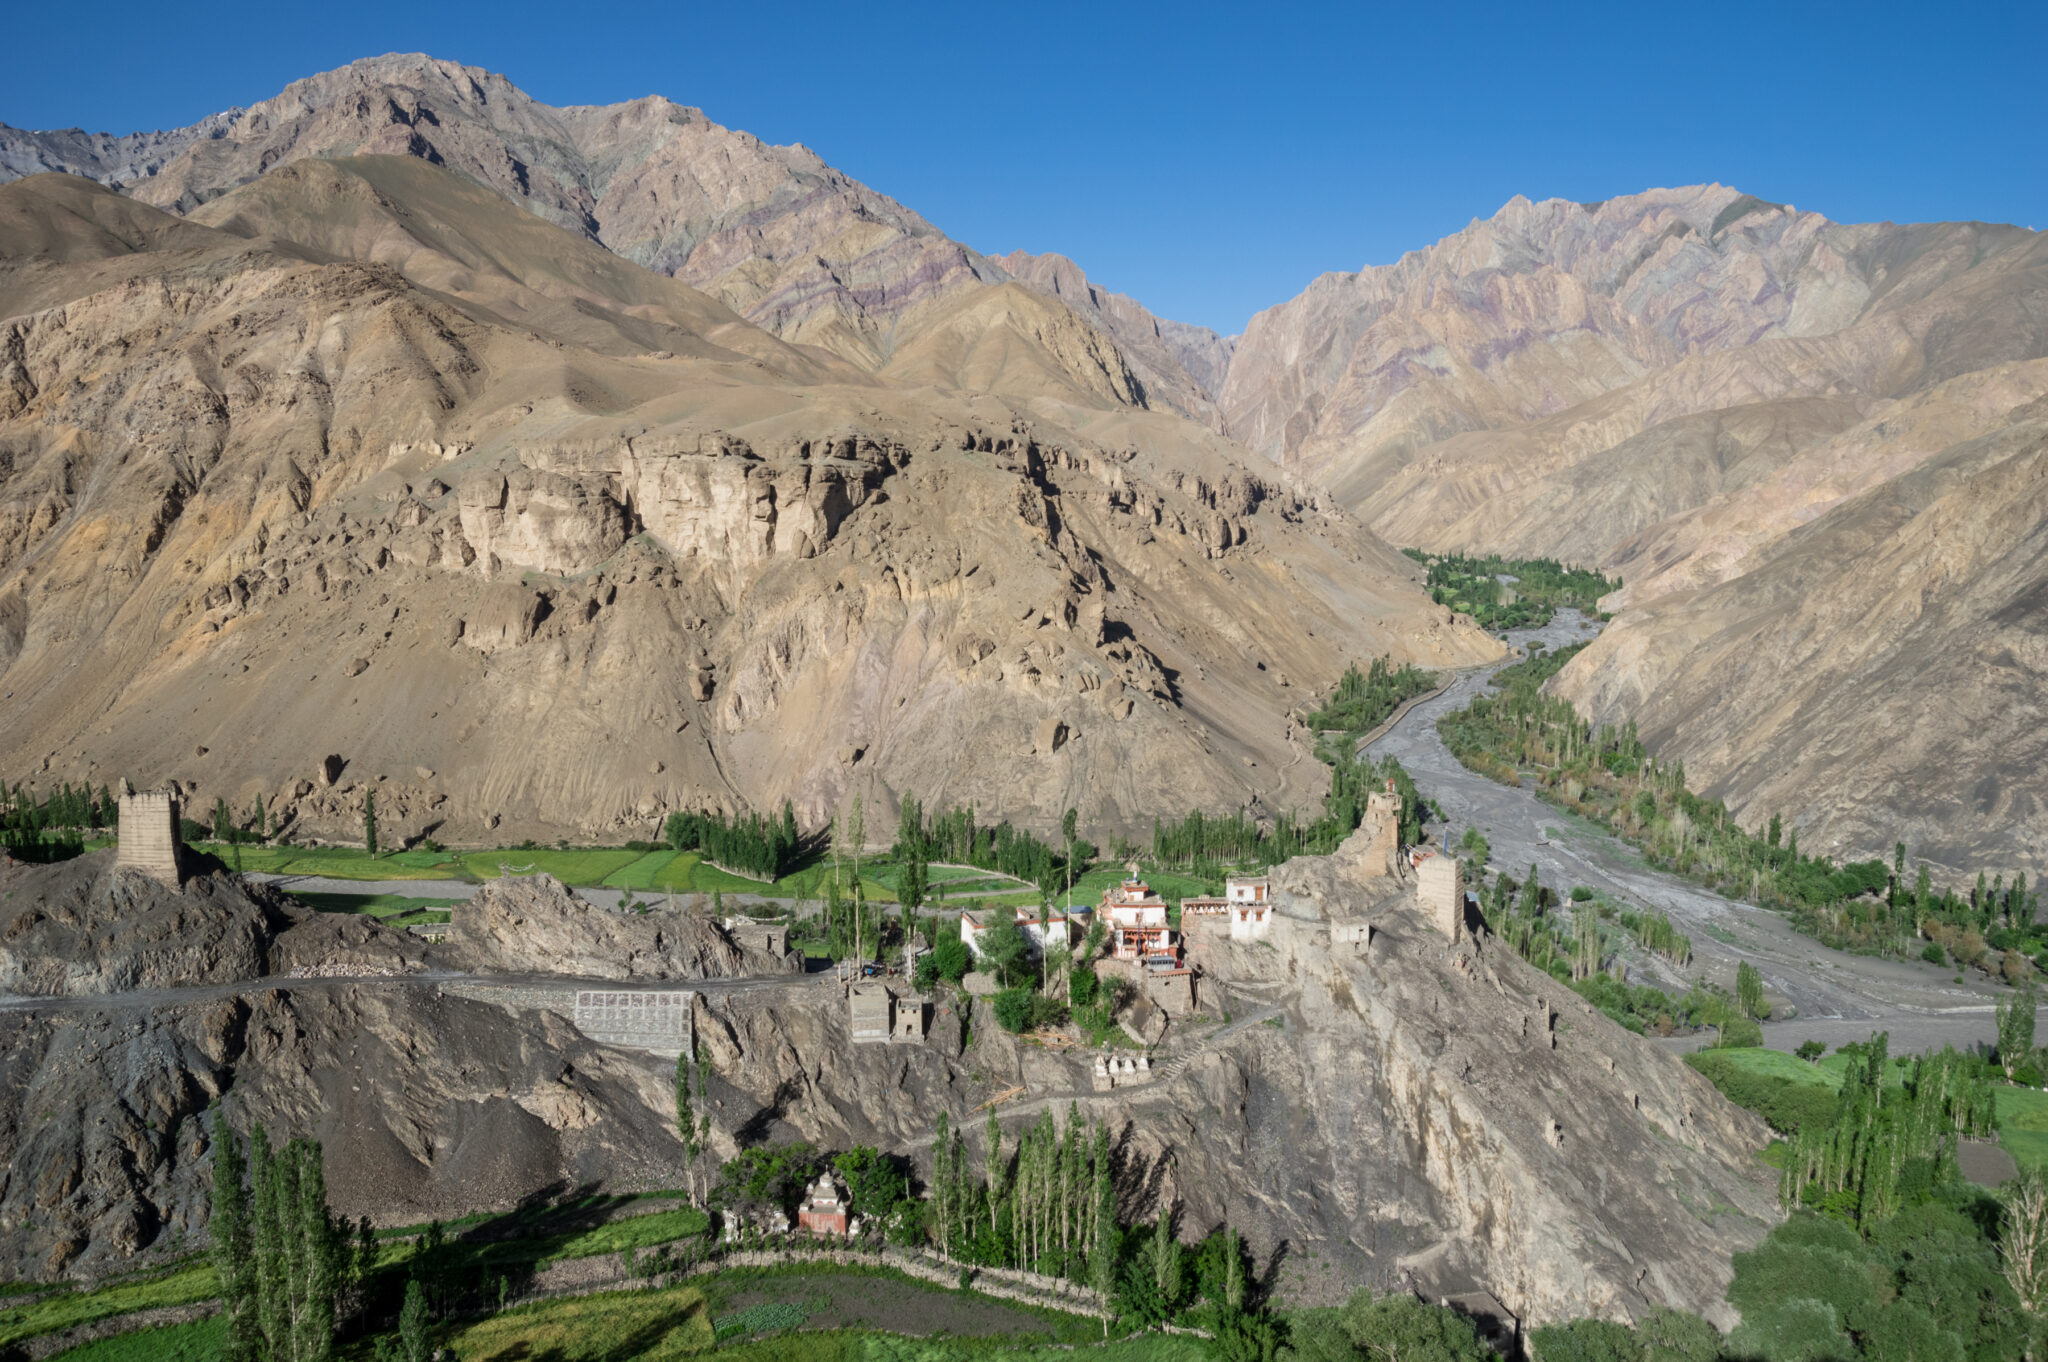 Small collection of buildings perched on outcropping situated in verdant river valley between barren mountains